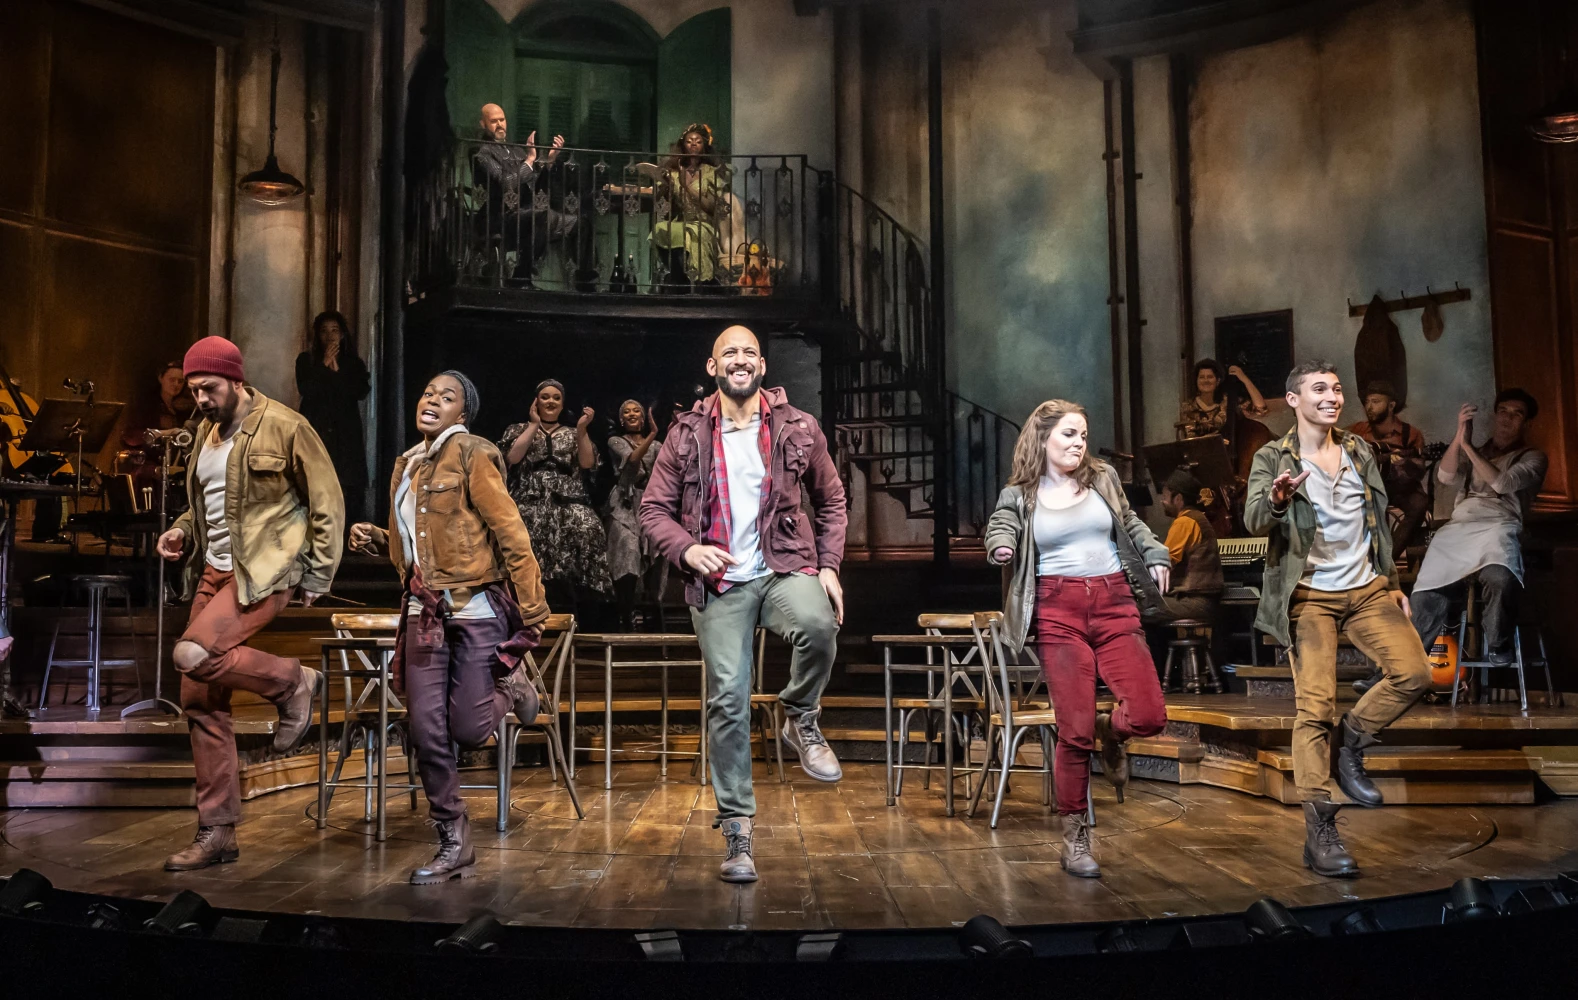 Hadestown: What to expect - 7